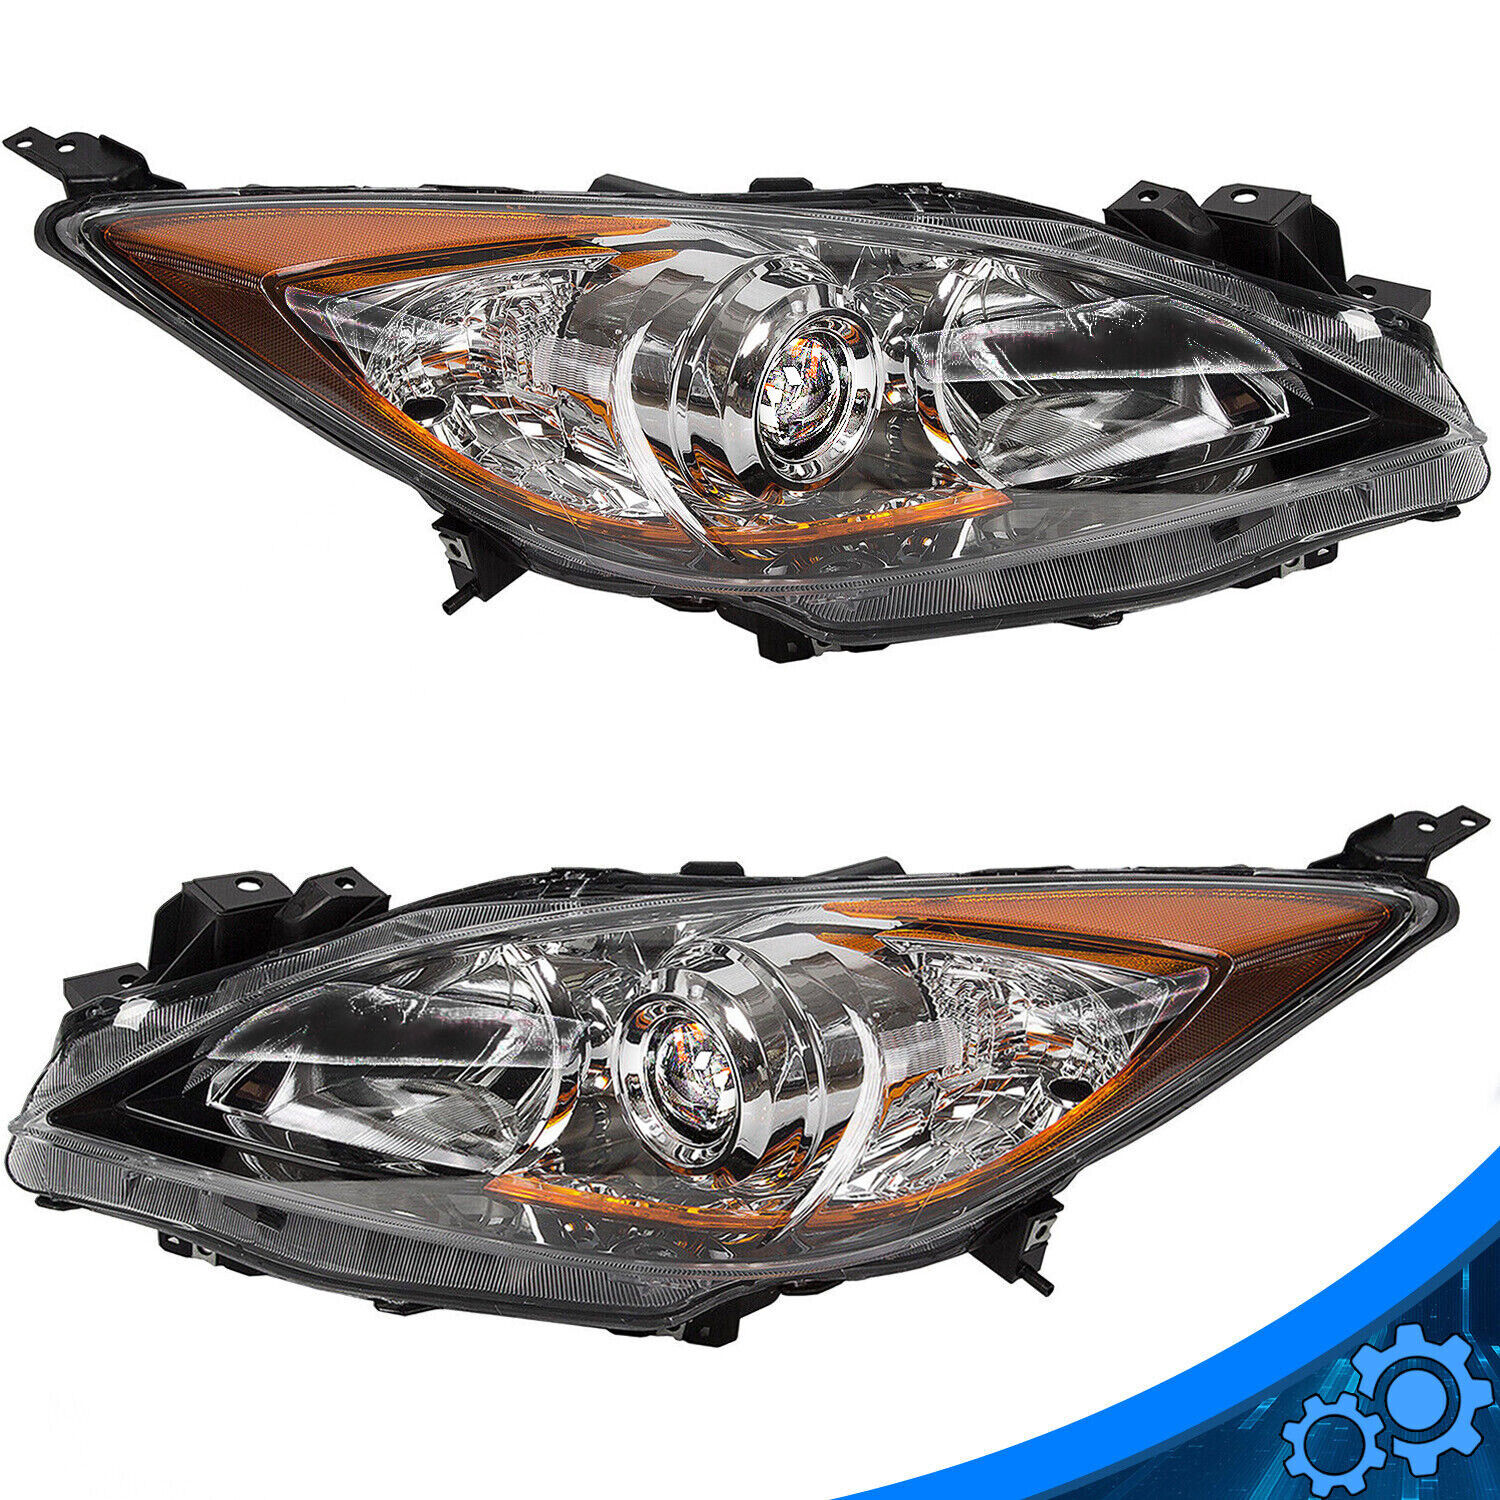 Headlights Assembly For Mazda 3 Sport 2010 2011 2012 2013 Front Lamps One Pair